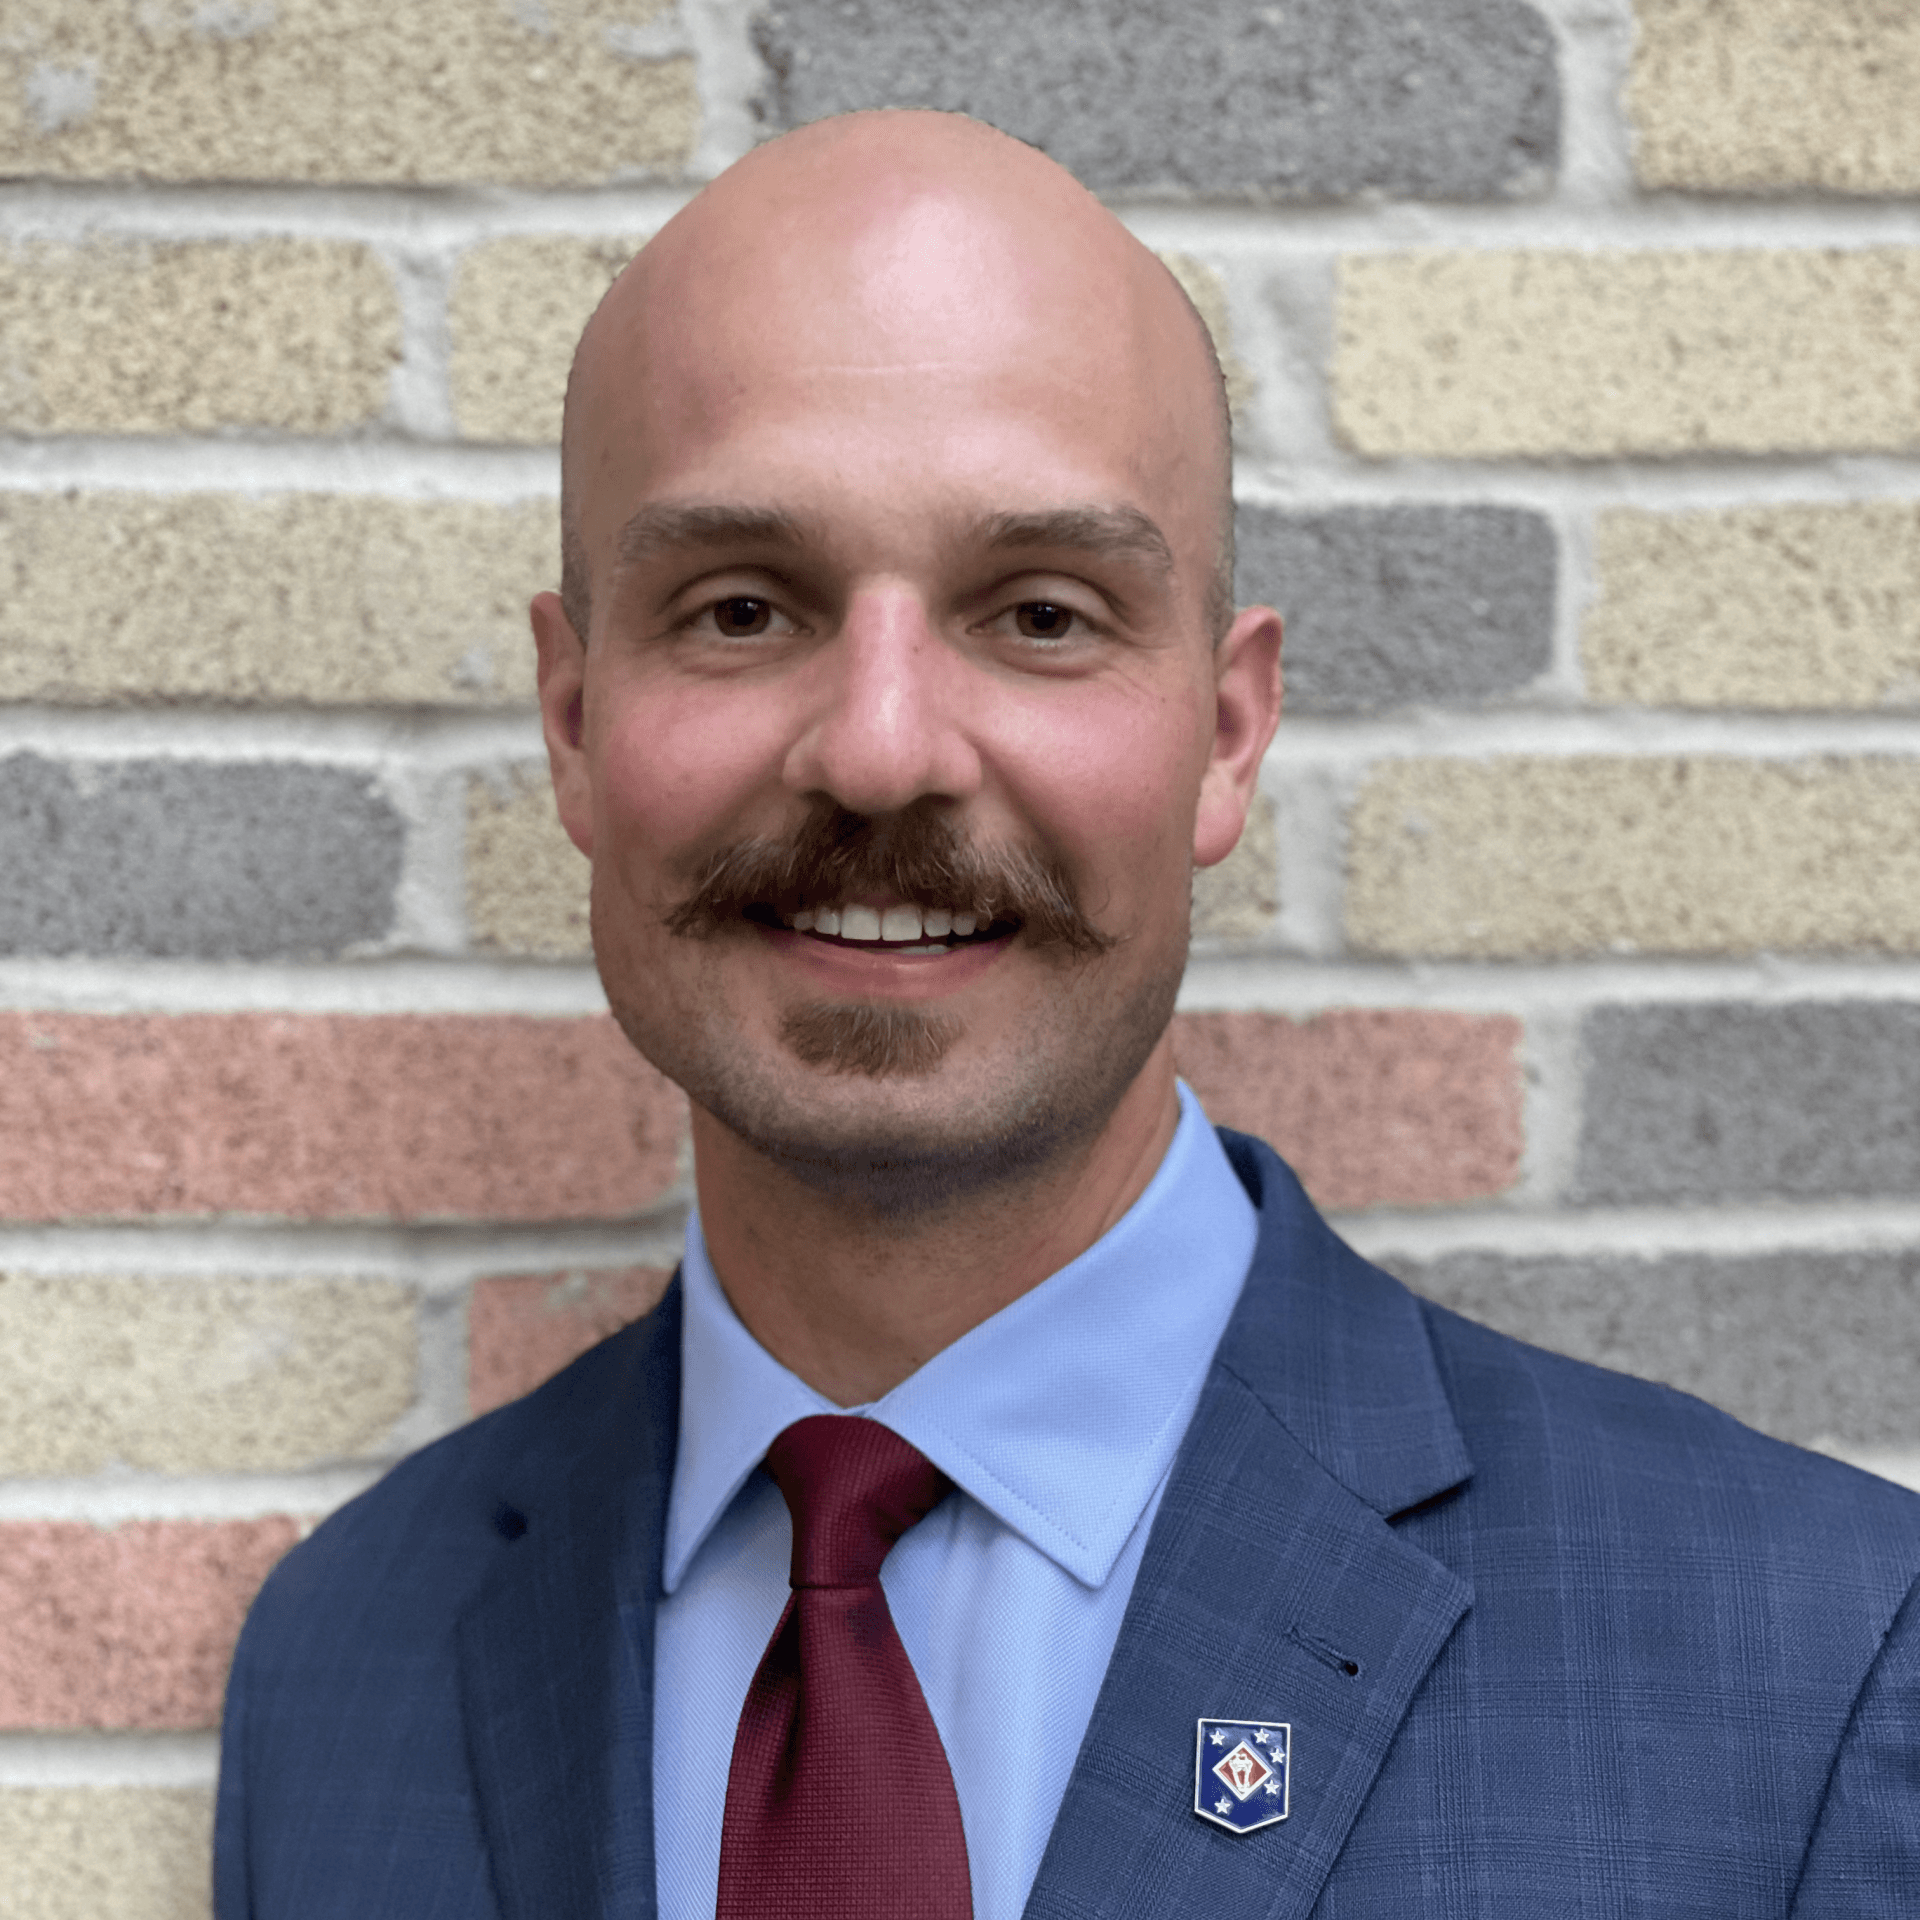 A bald man with a mustache wearing a suit and tie is smiling in front of a brick wall.